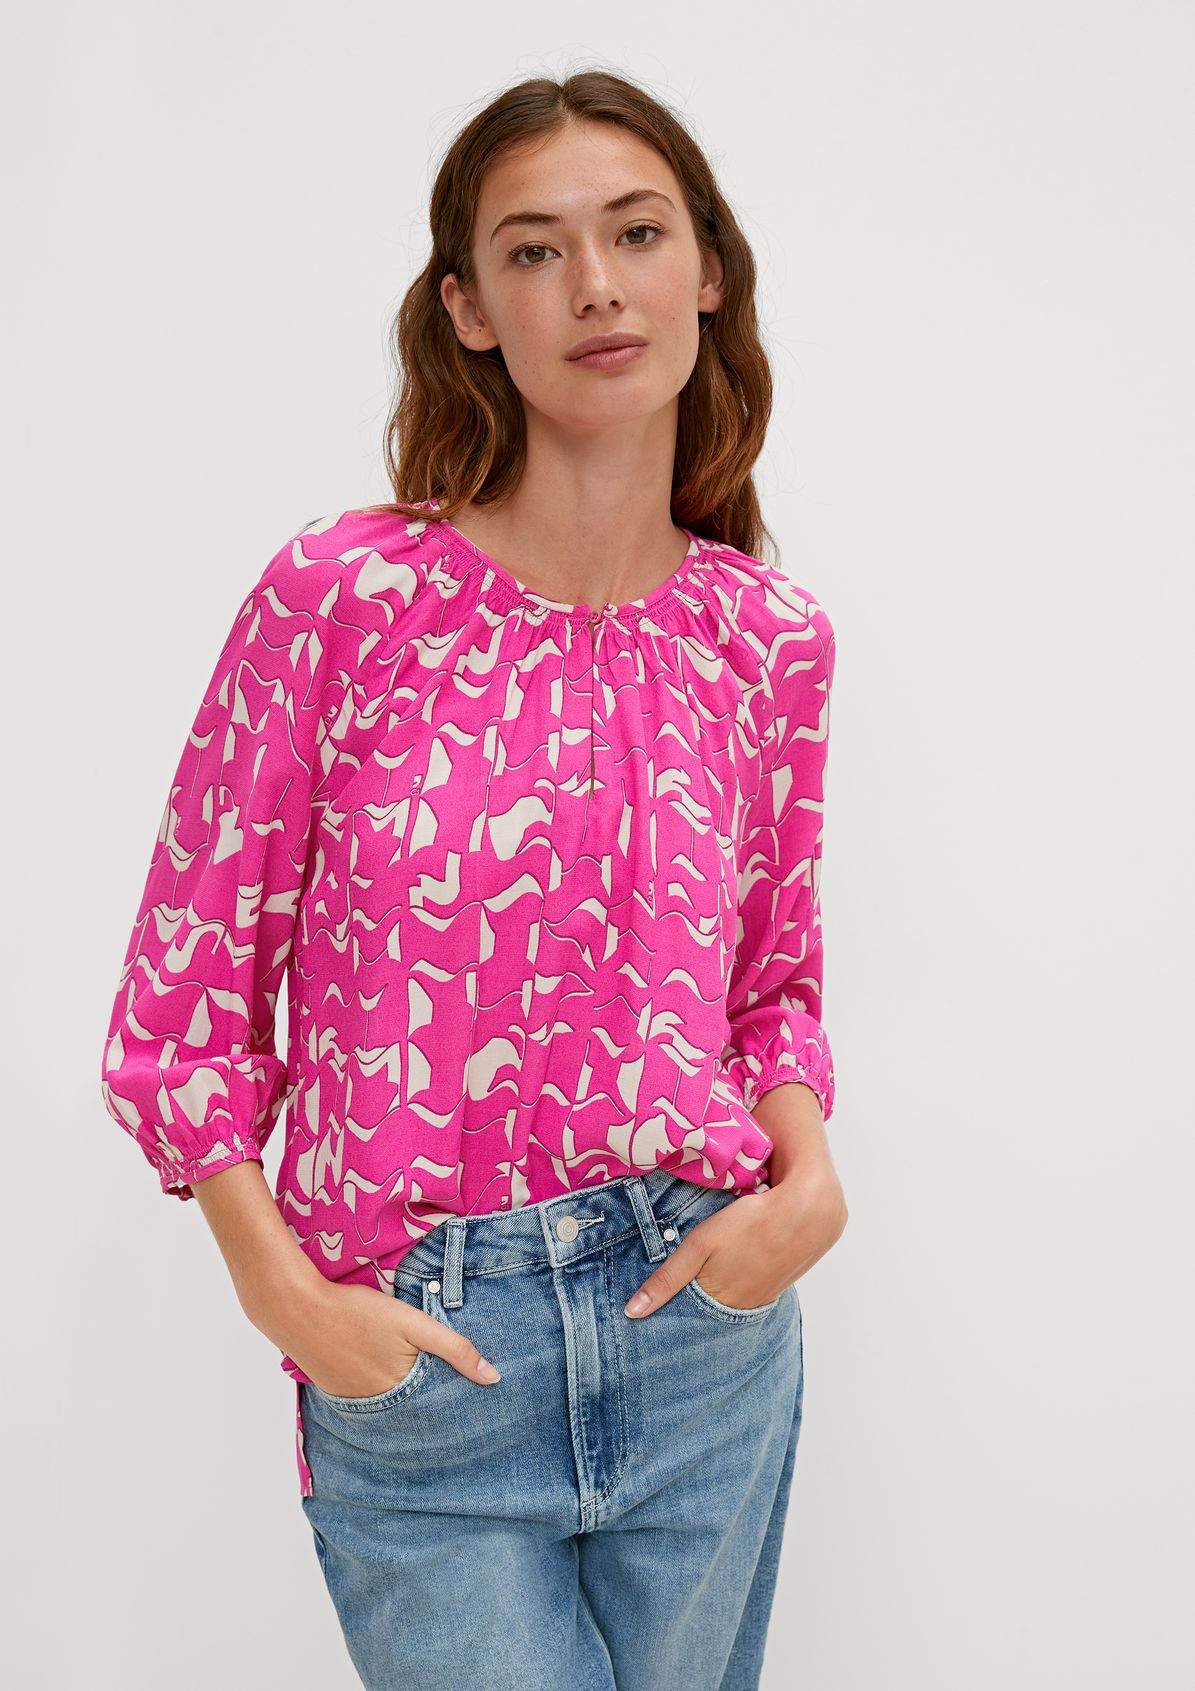 Tunic-style print blouse from comma